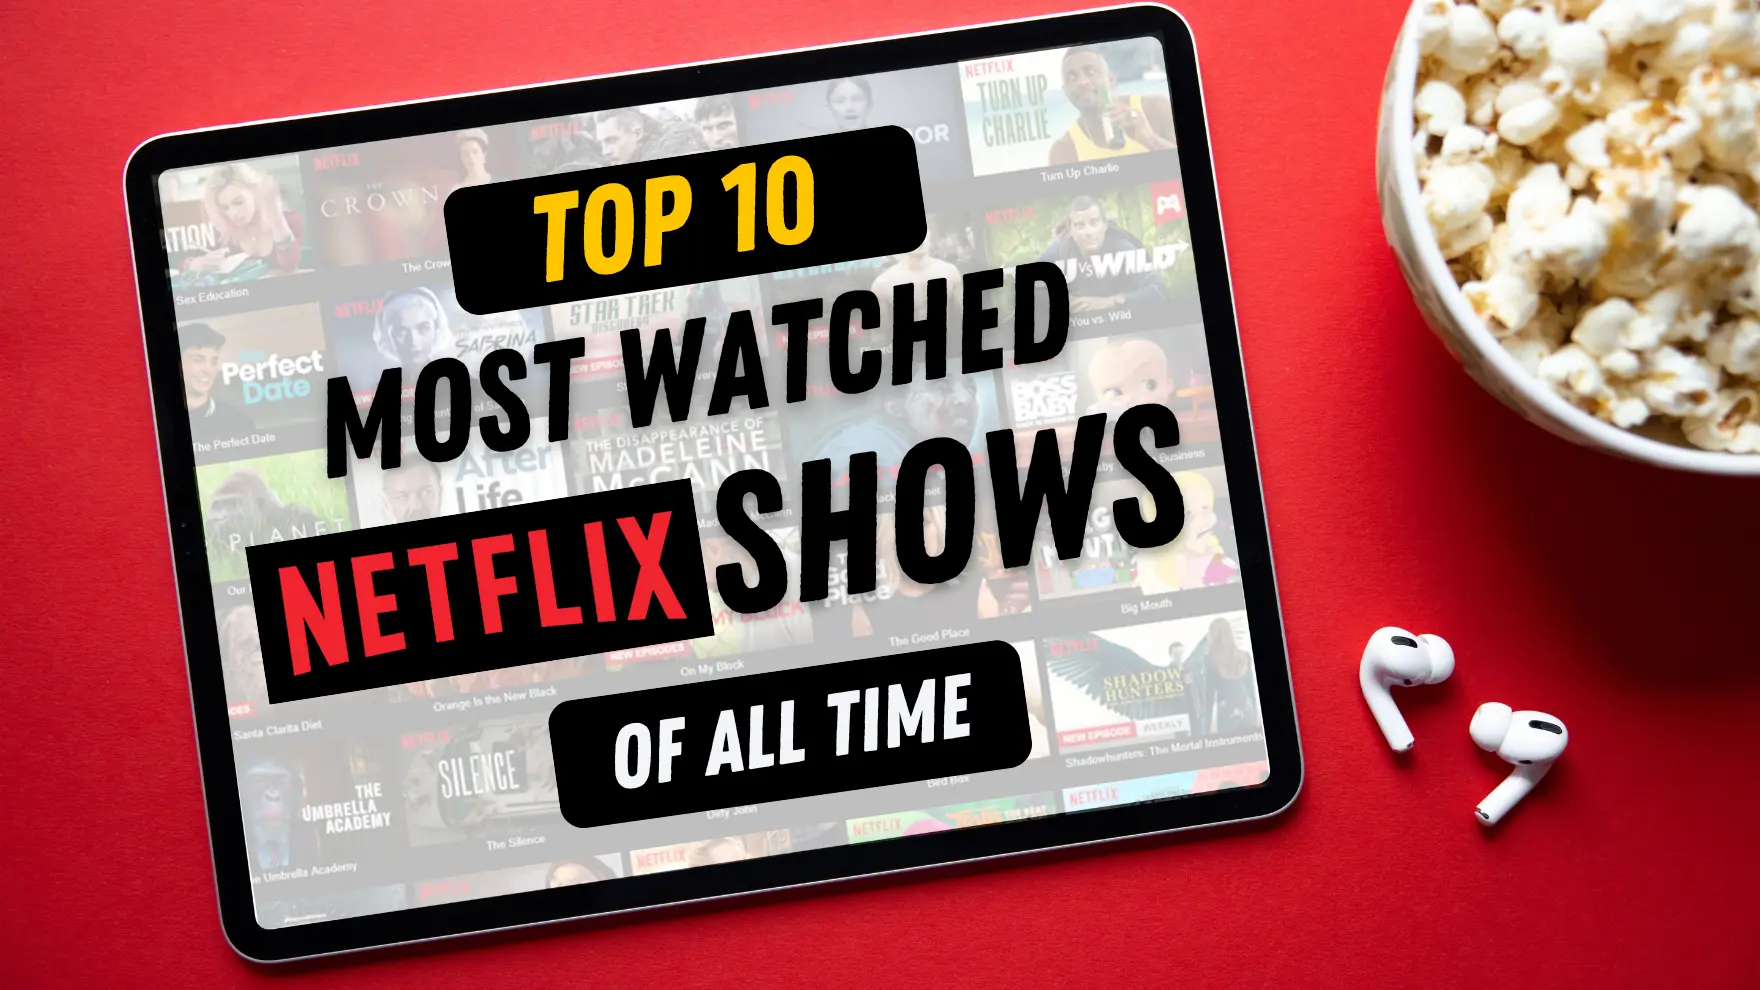 Best Top 10 Most Watched Netflix Shows of All Time